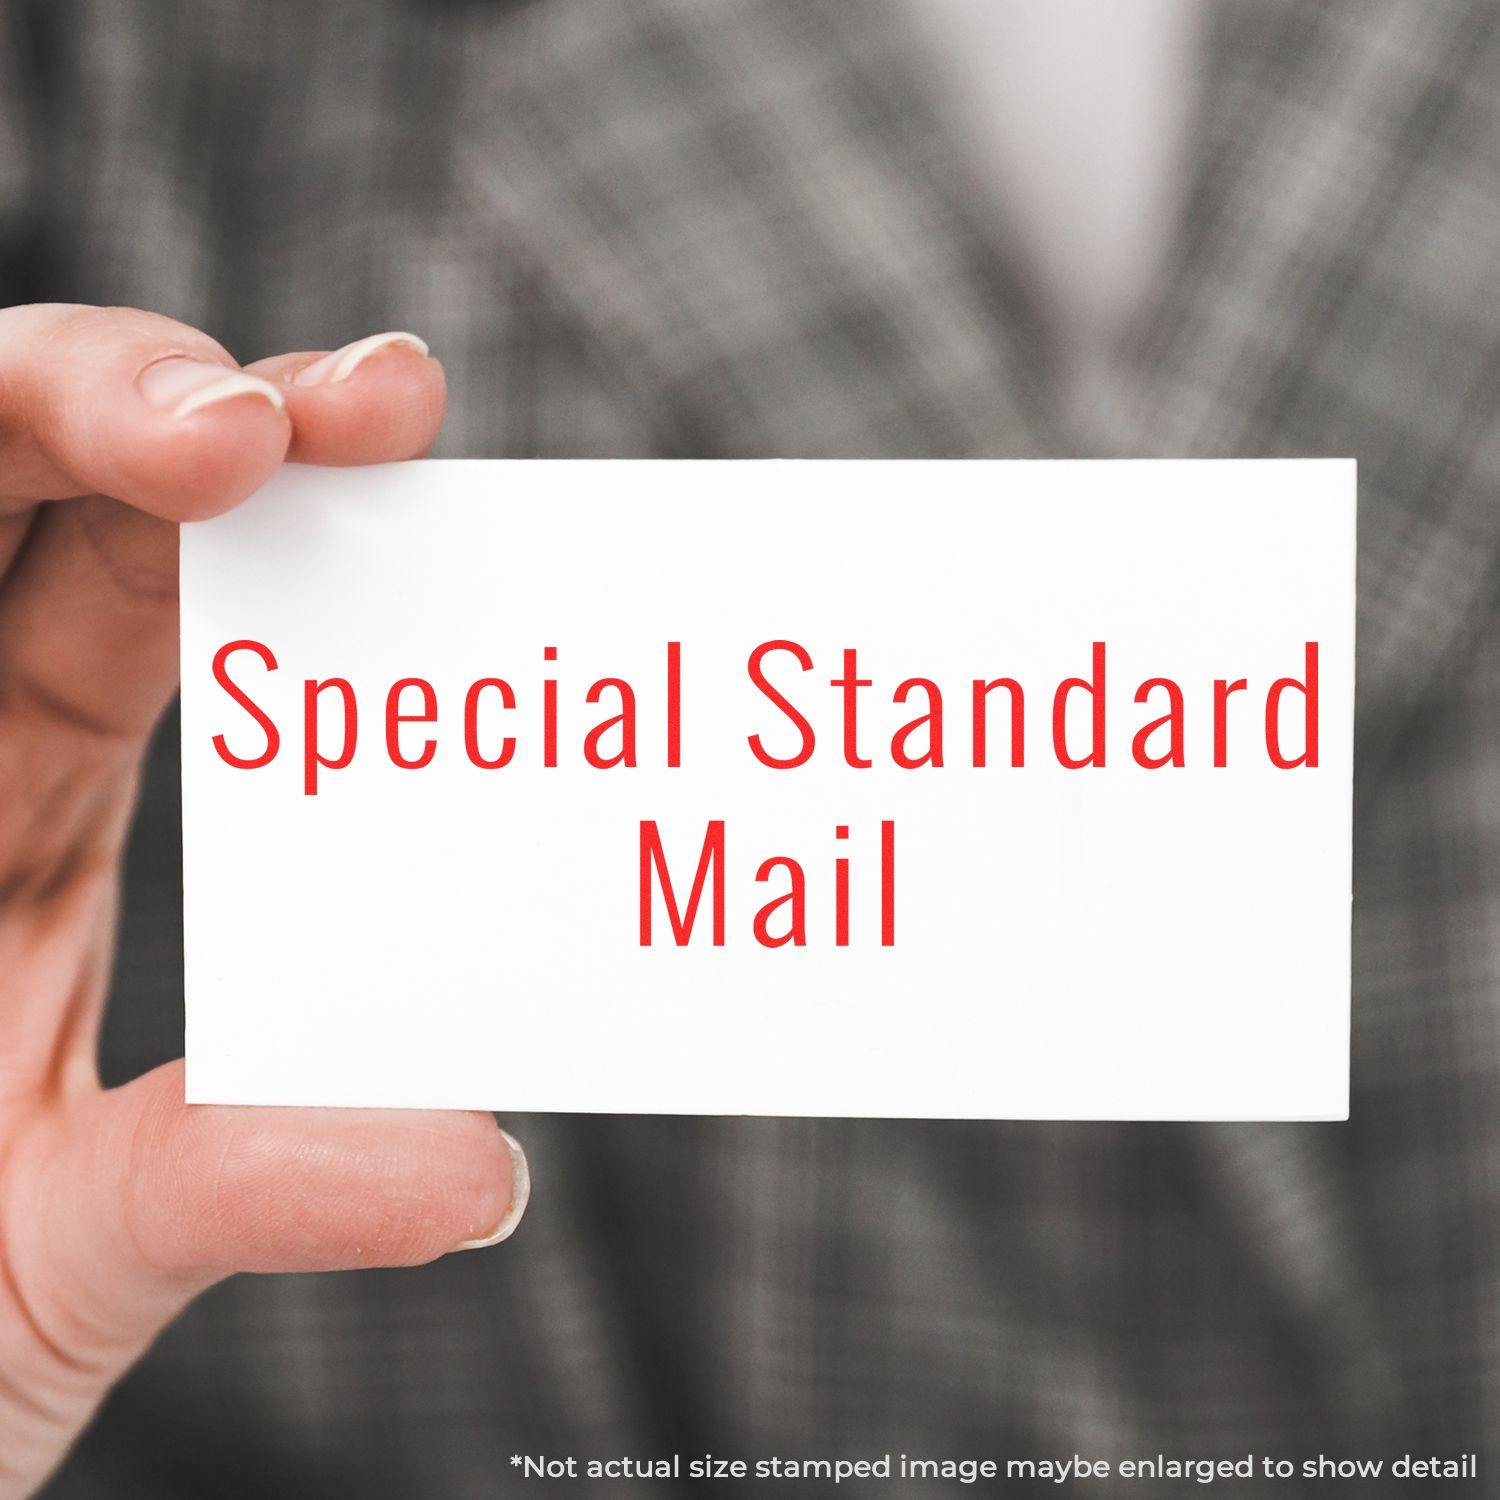 A stock office rubber stamp with a stamped image showing how the text "SPECIAL STANDARD MAIL" in a large font is displayed after stamping.